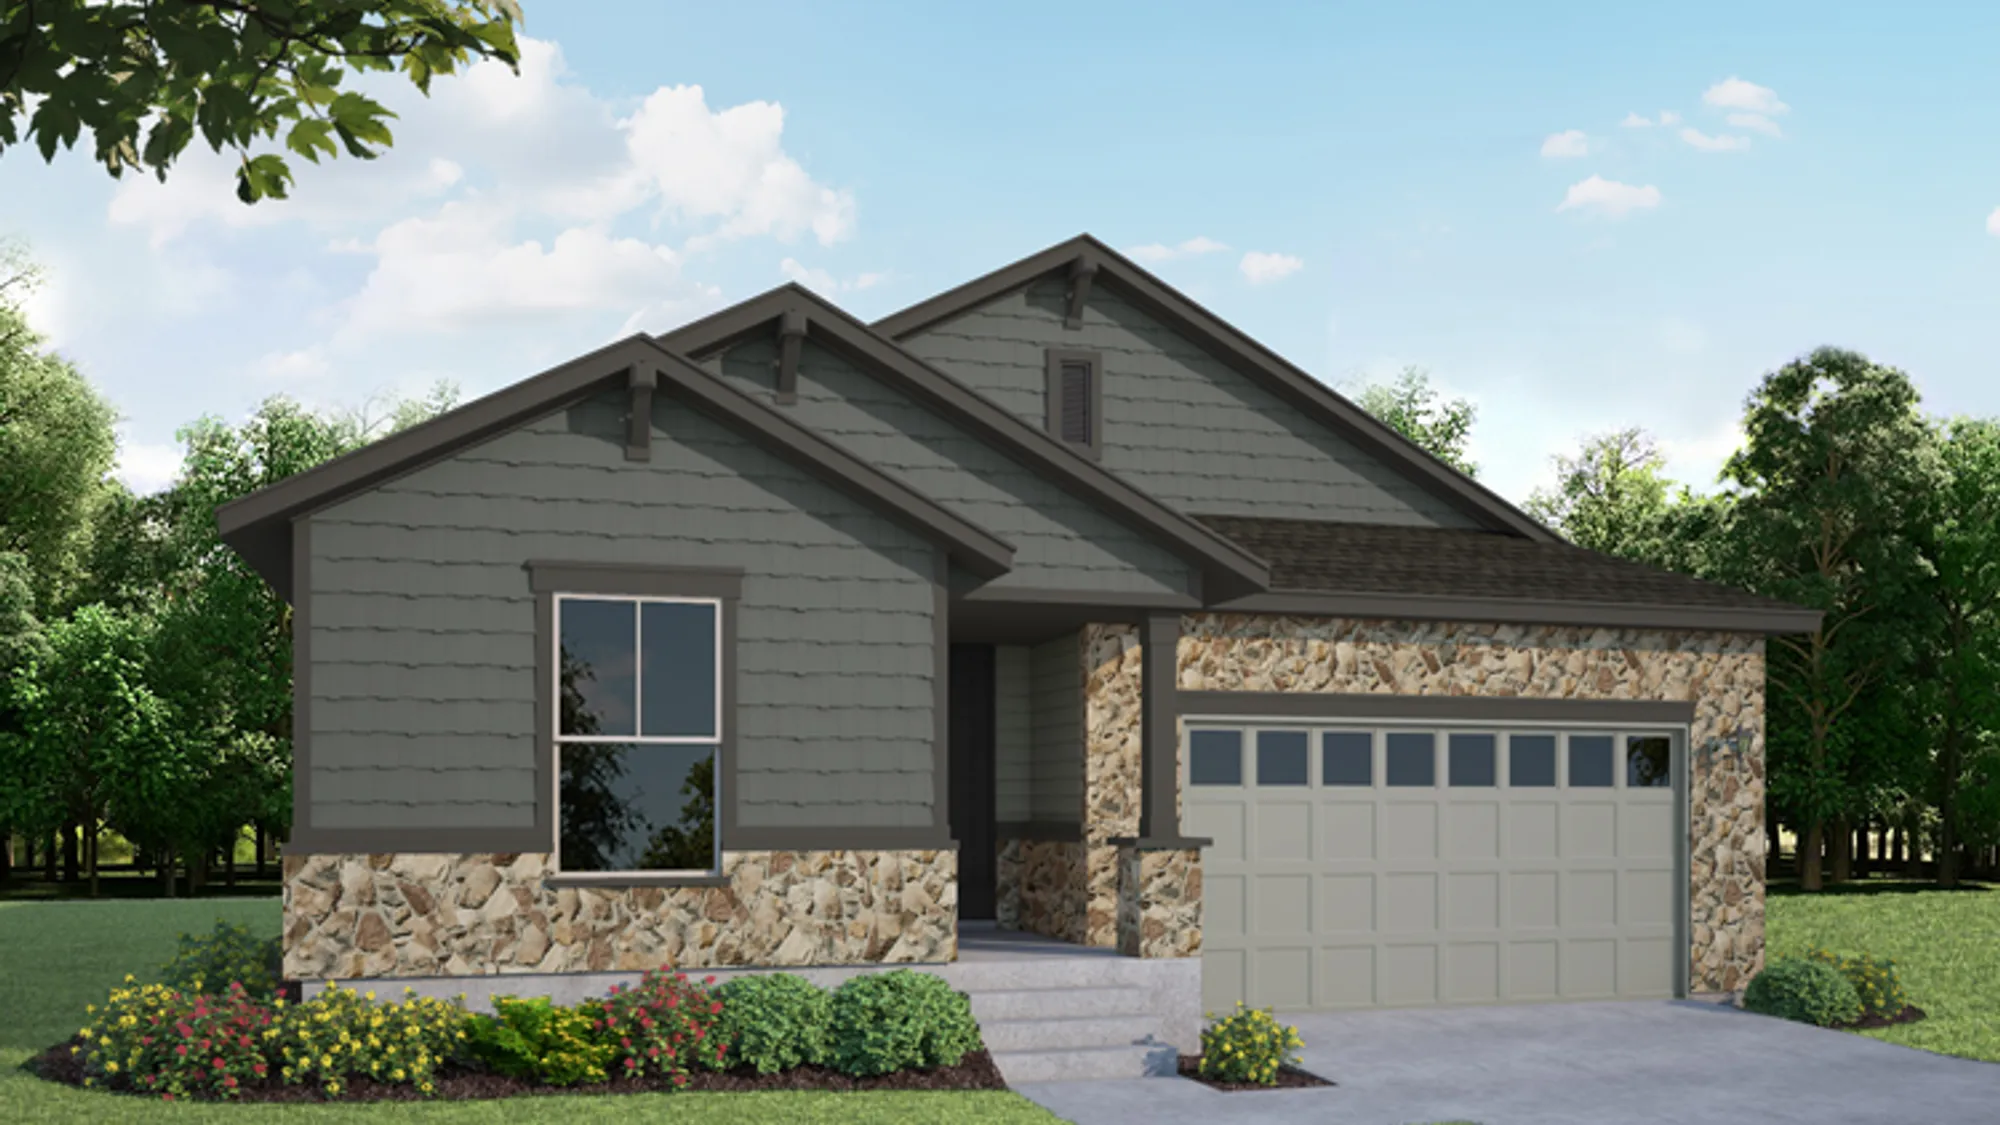 Plan C408 Elevation A with Manufactured Stone - SH